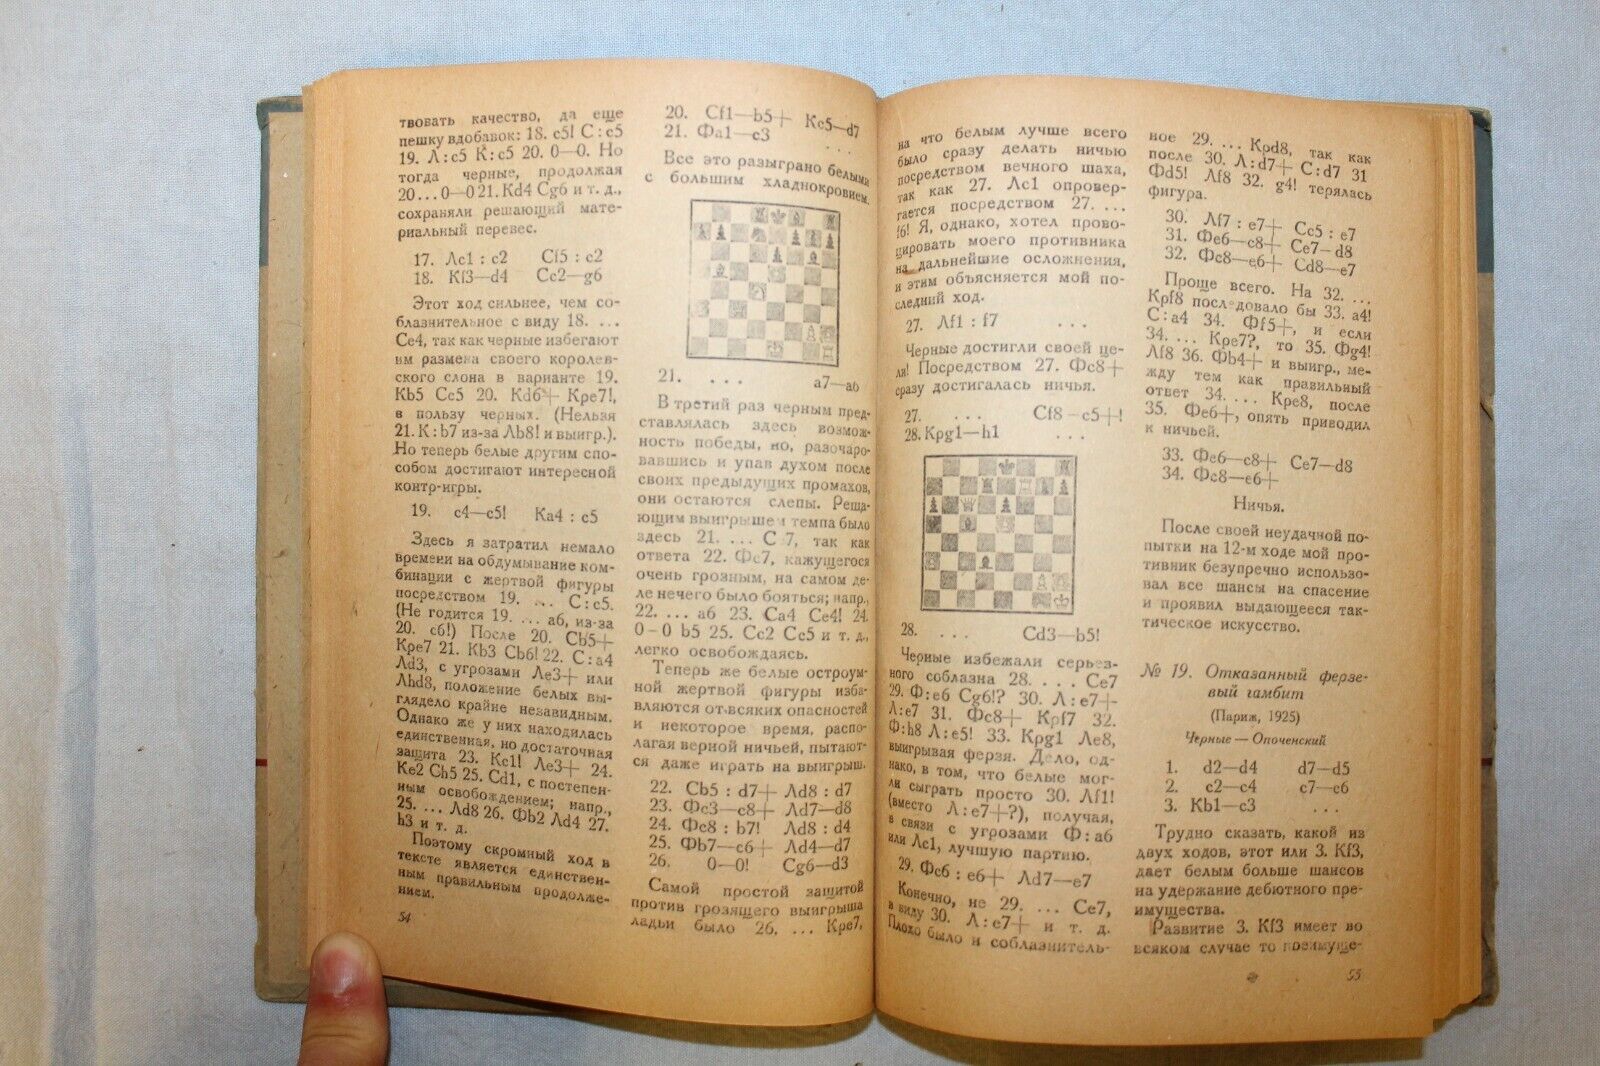 11498.Russian chess book: Alekhine - On the Way to Higher chess Achievements. 1932